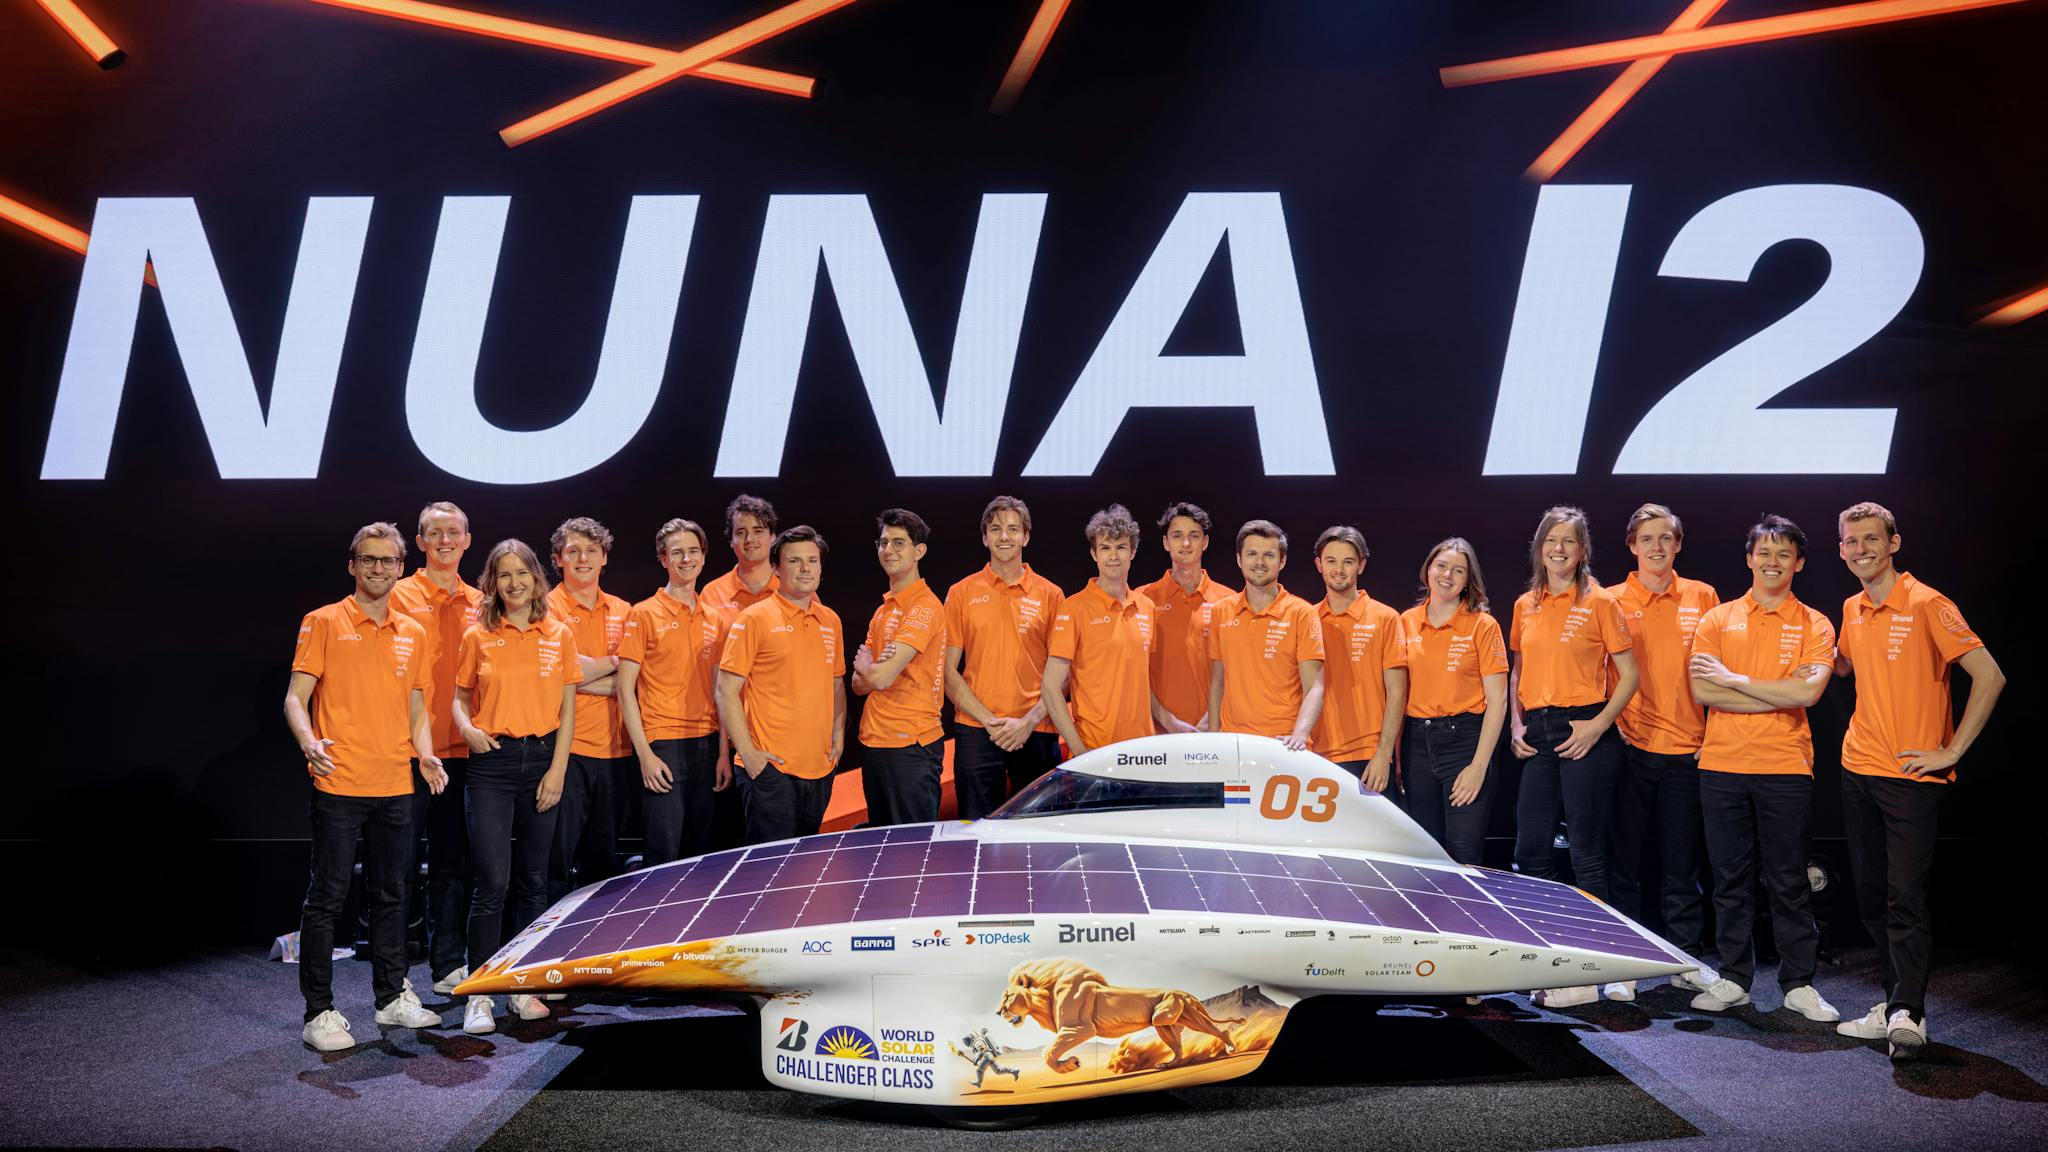 Nuna 12 on stage during the car reveal with team